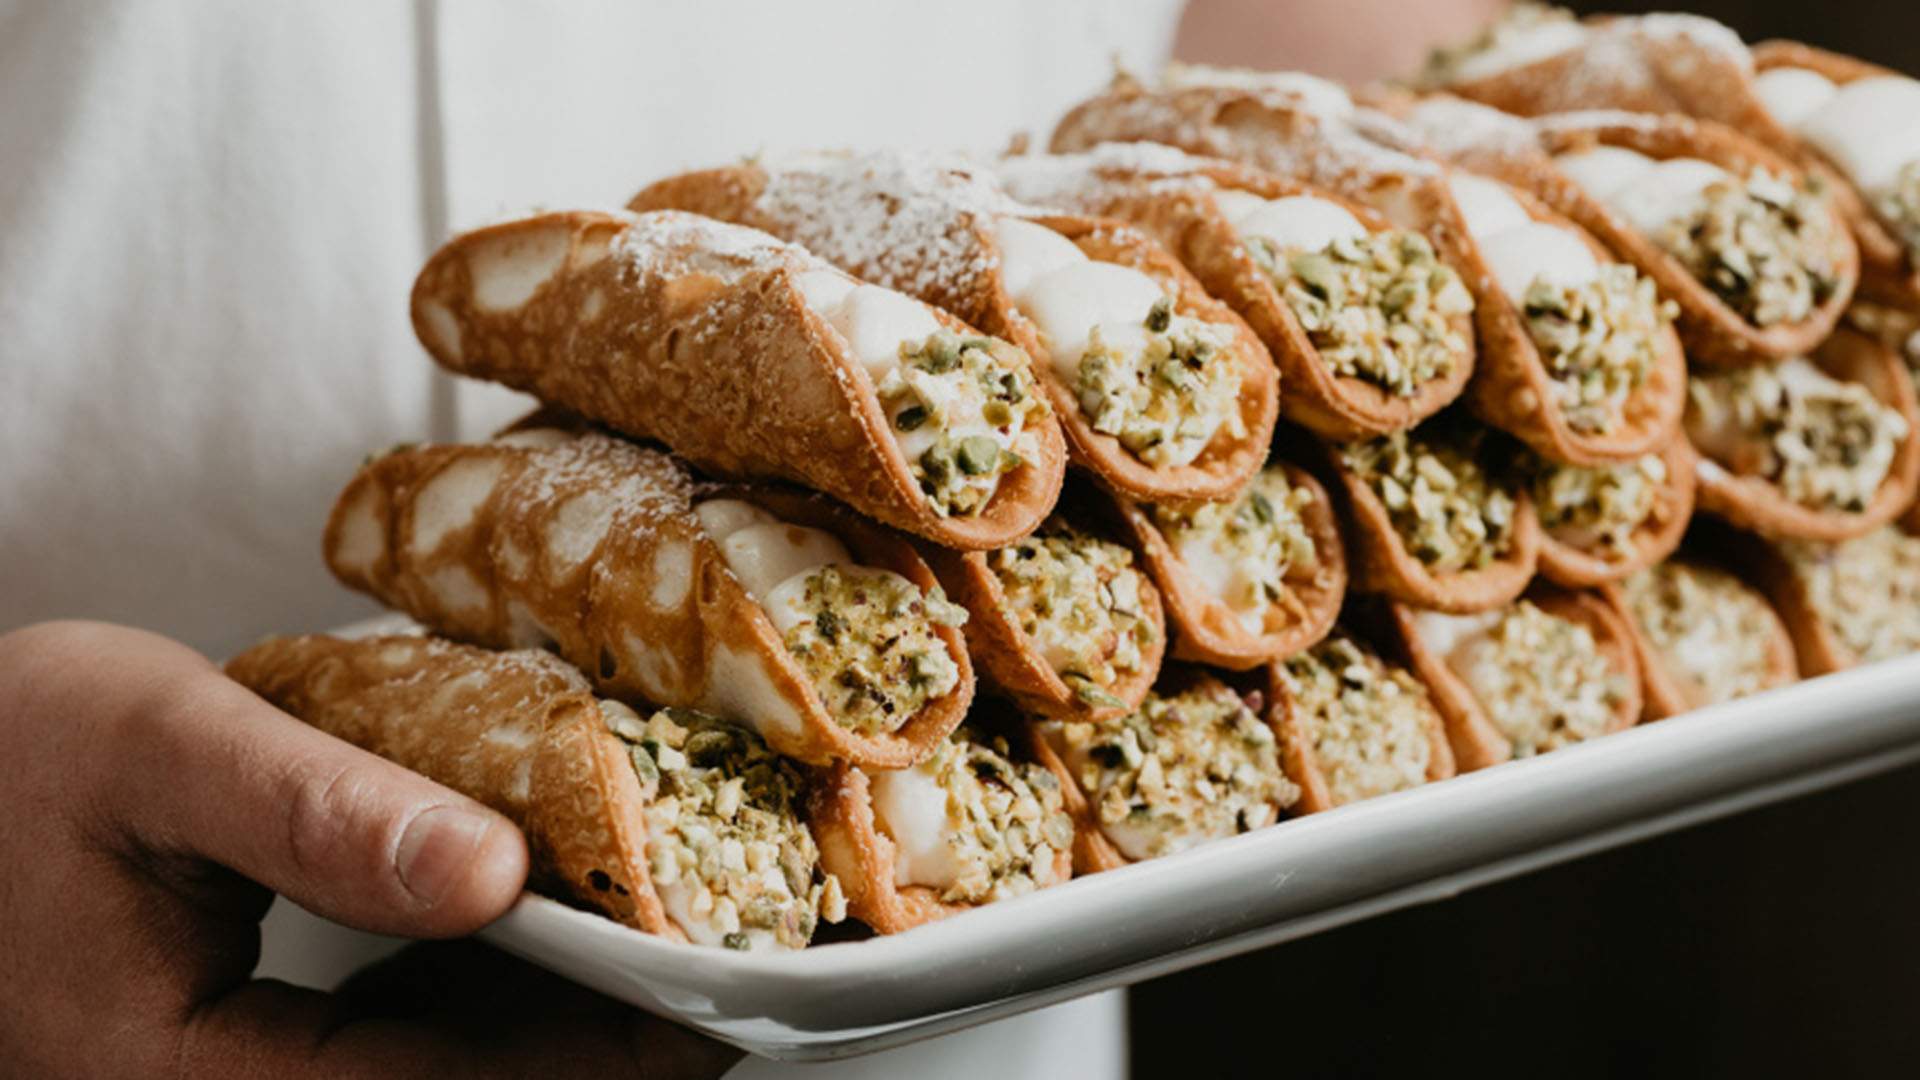 Melbourne's Dedicated Cannoli Factory Cannoleria Is Coming to Queensland for the First Time